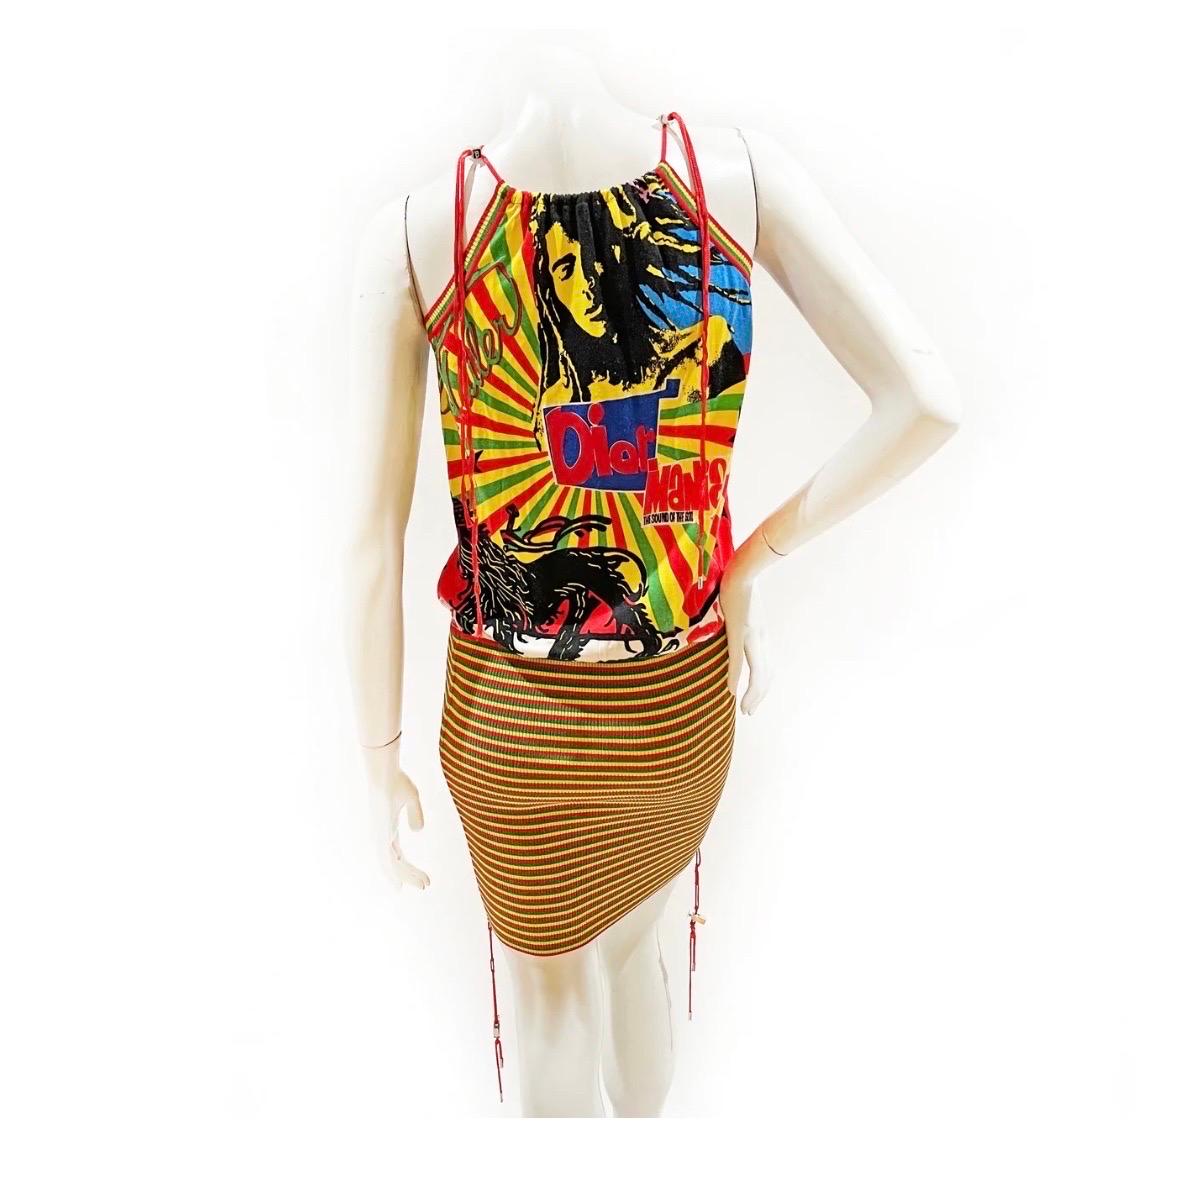 Rasta Mania Collection Dress by John Galliano for Dior  
Made in France
Spring/Summer 2004
Signature Rasta Mania logo graphics throughout top 
Red spaghetti straps
Body-con red, green & yellow striped skirt
Silver tightening toggles on shoulder